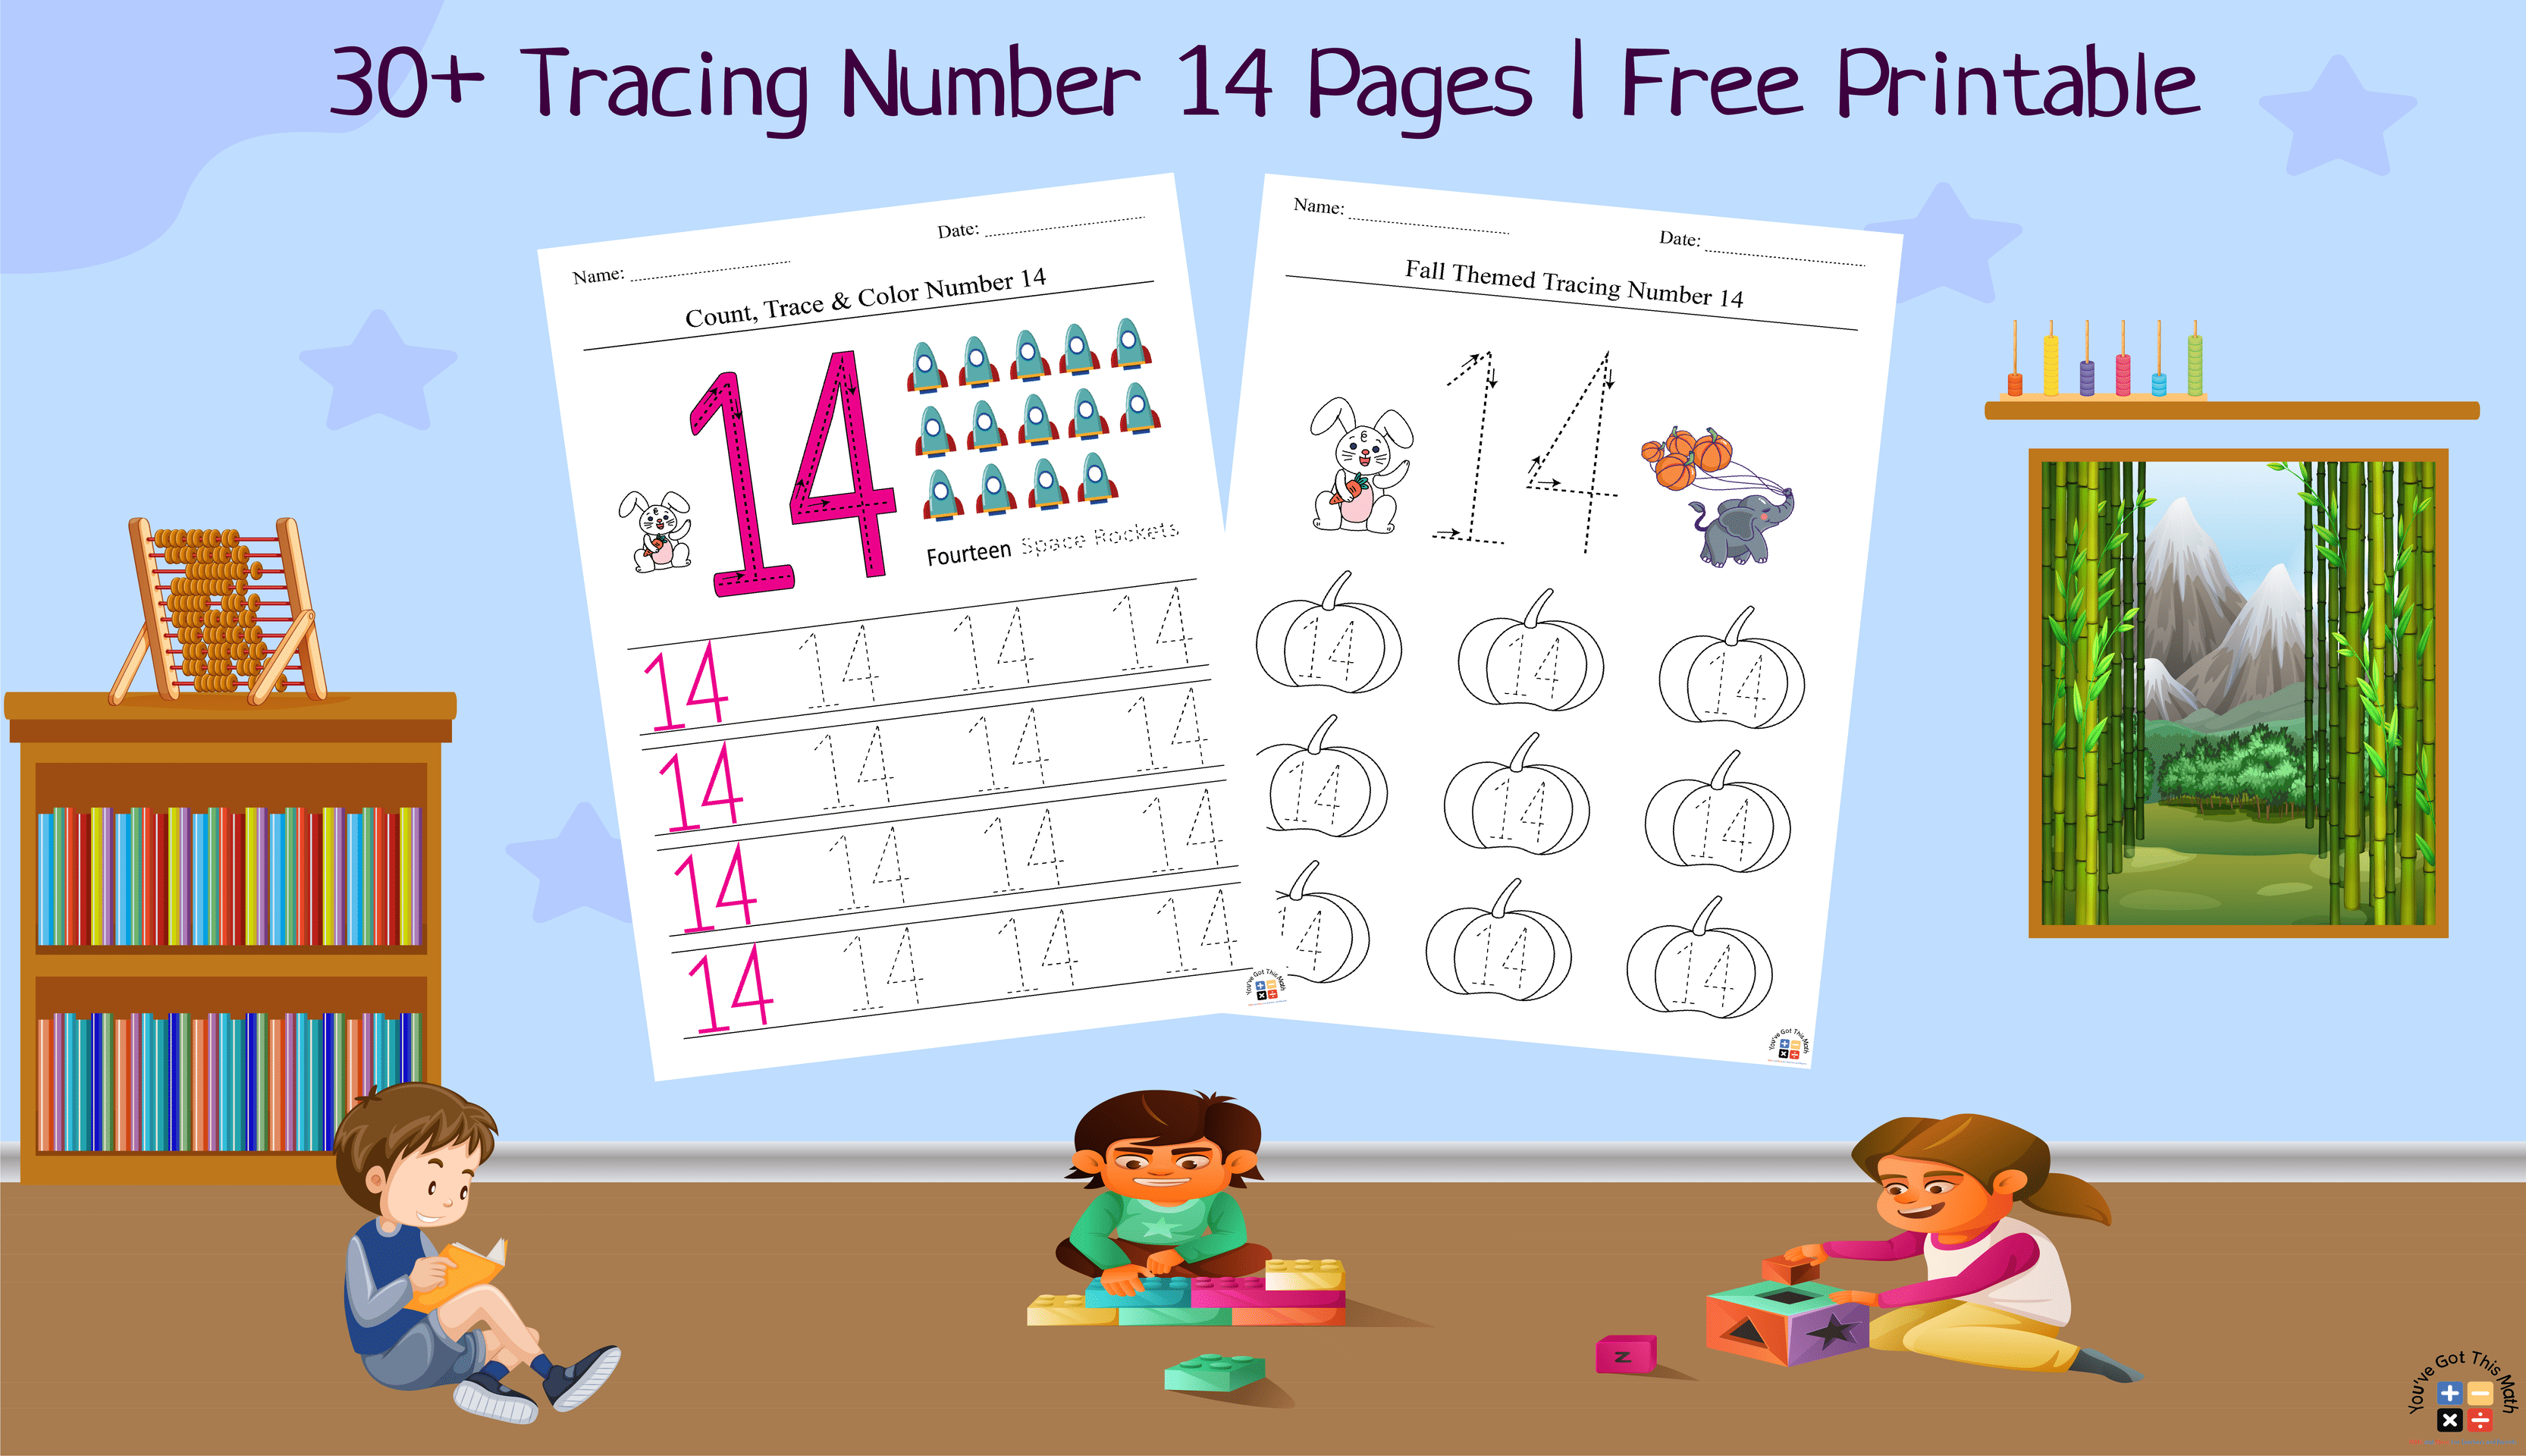 30+ Tracing Number 14 Pages | Free Printable